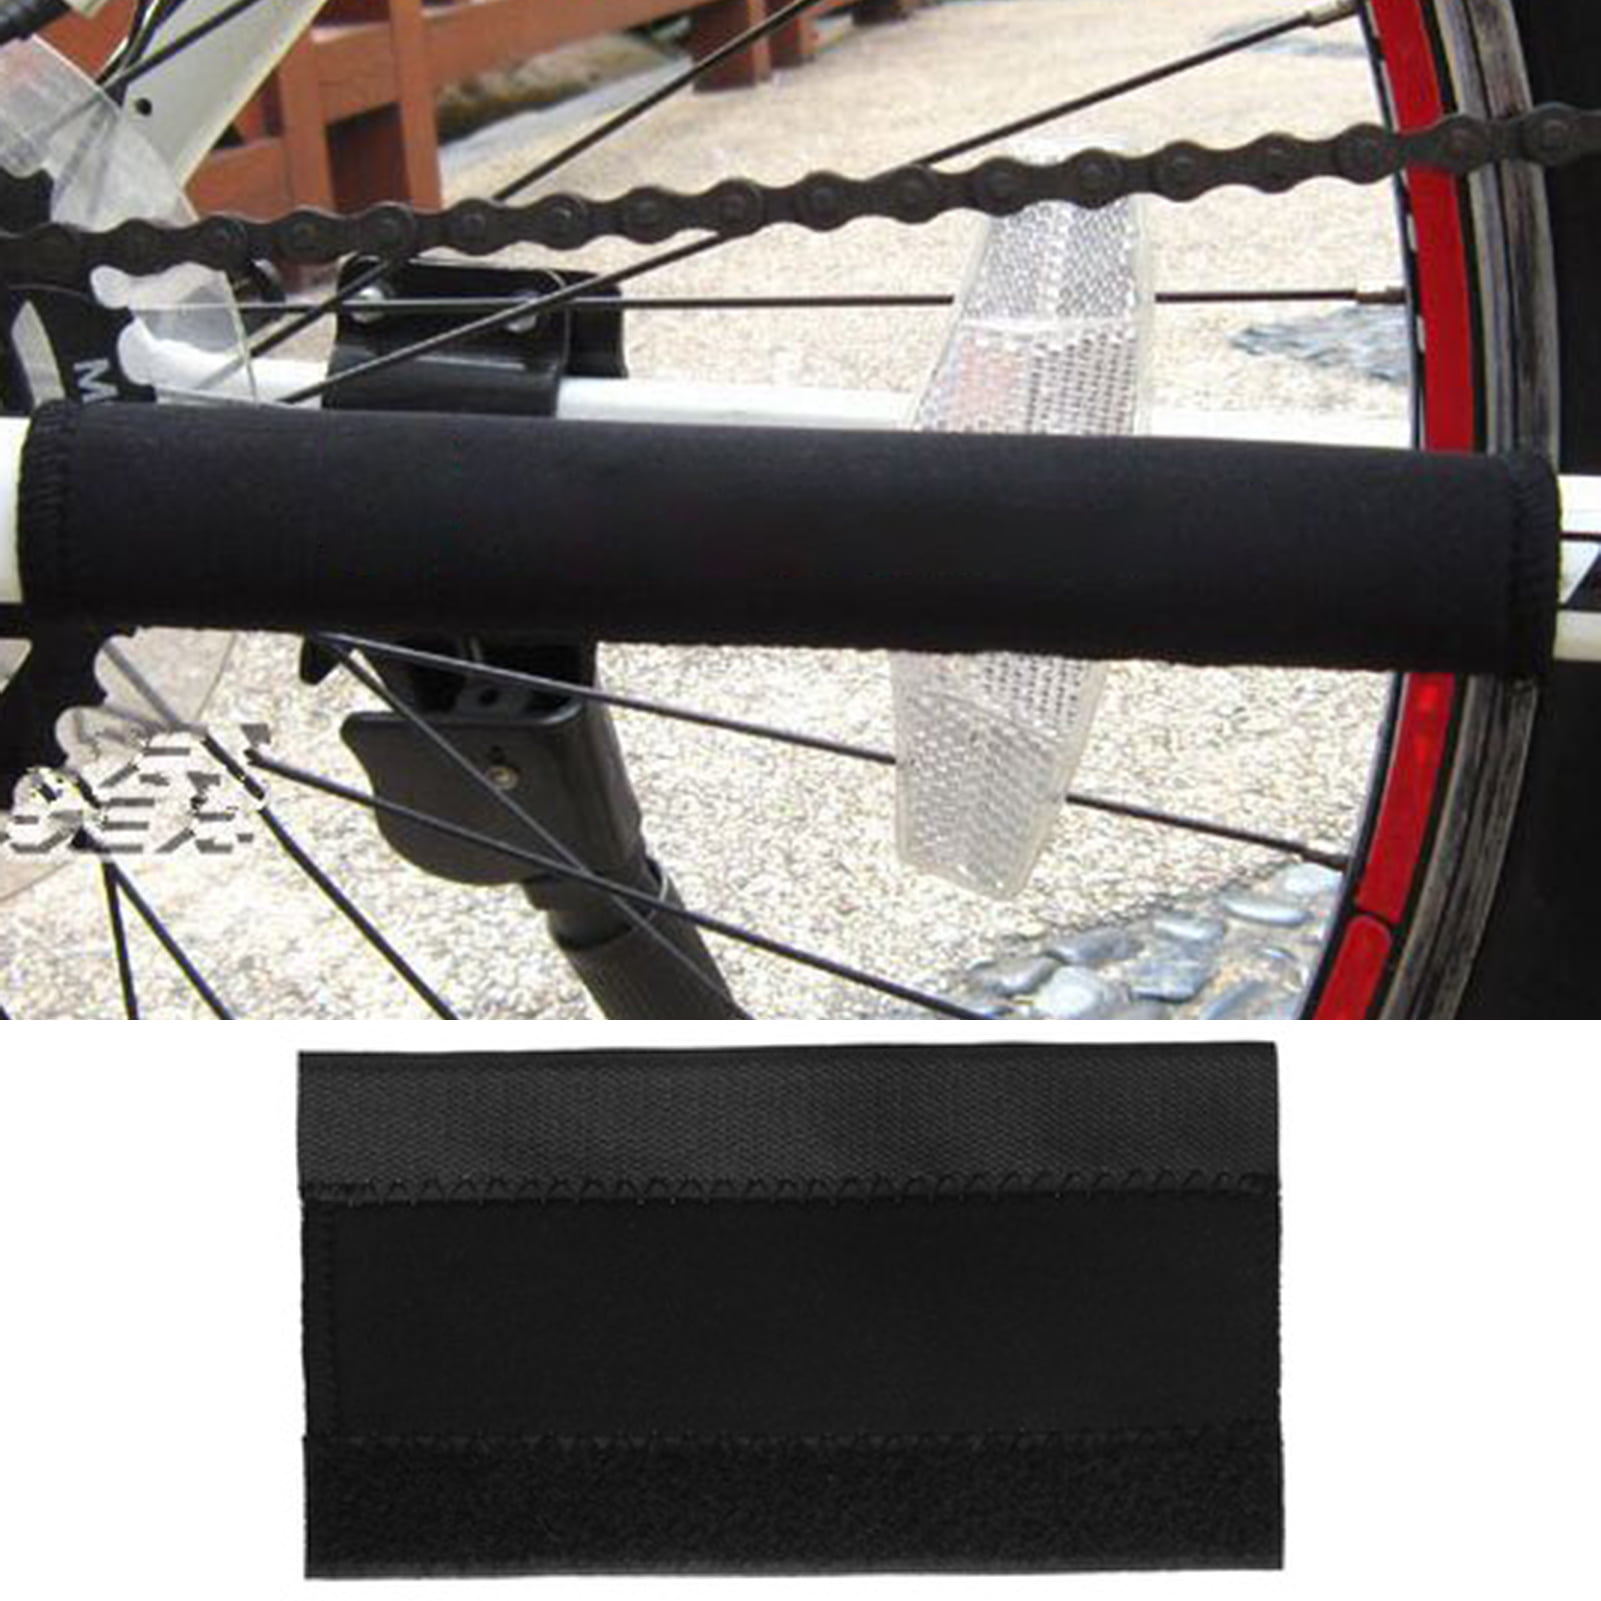 NEOPRENE Quick Fit CHAIN STAY FRAME PROTECTOR Black LATEST DESIGN-"FT/White"